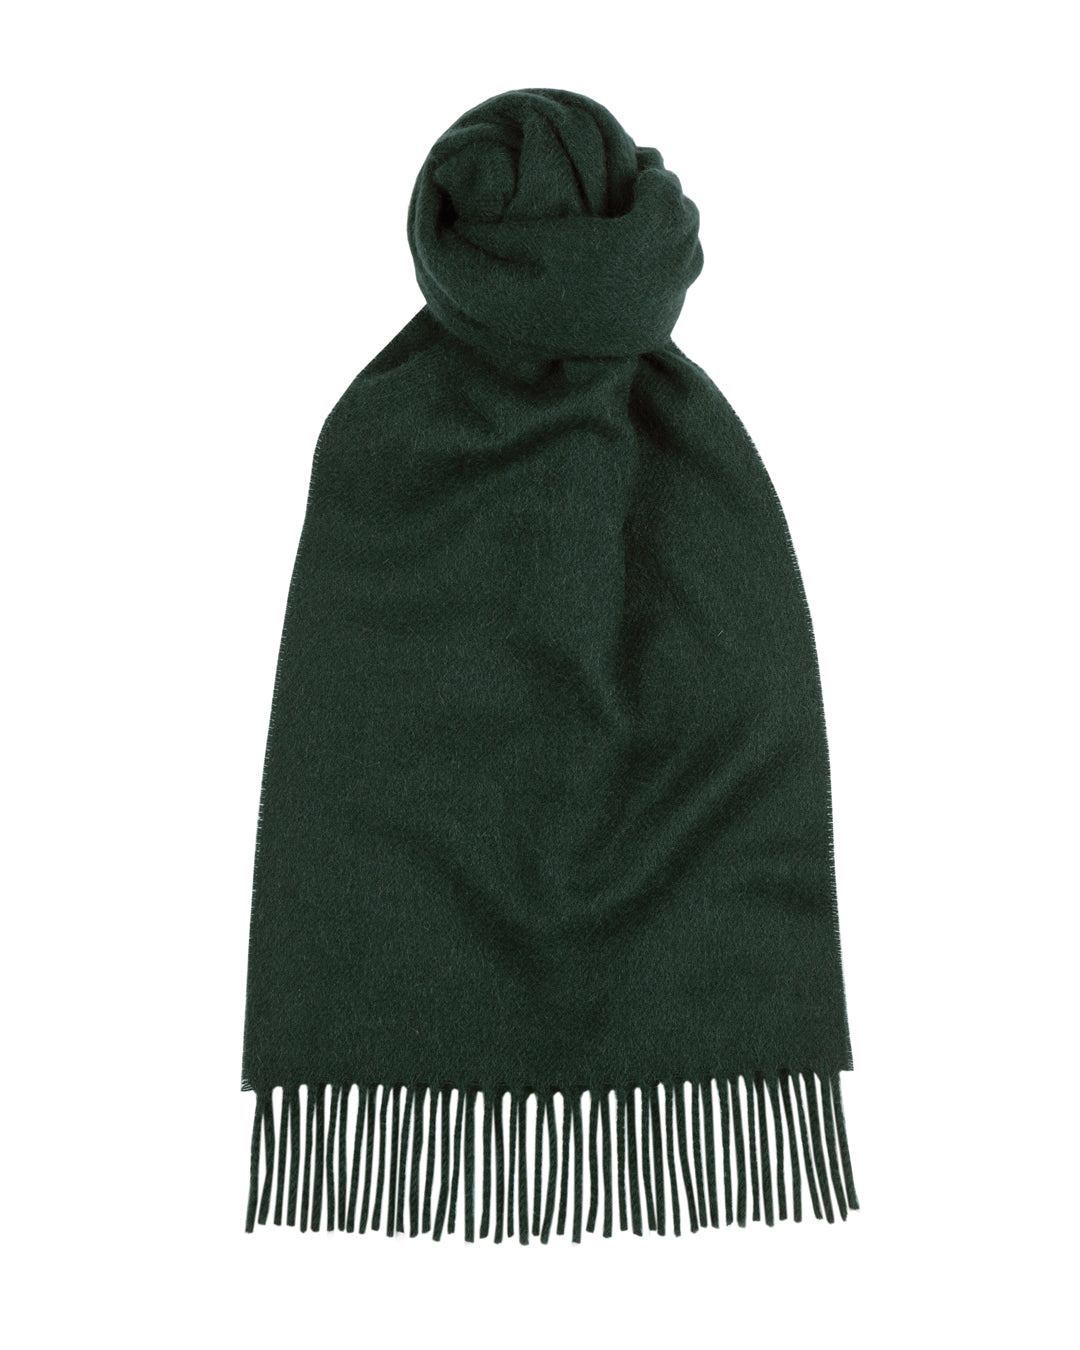 SALE - Limited Edition Cashmere Scarf